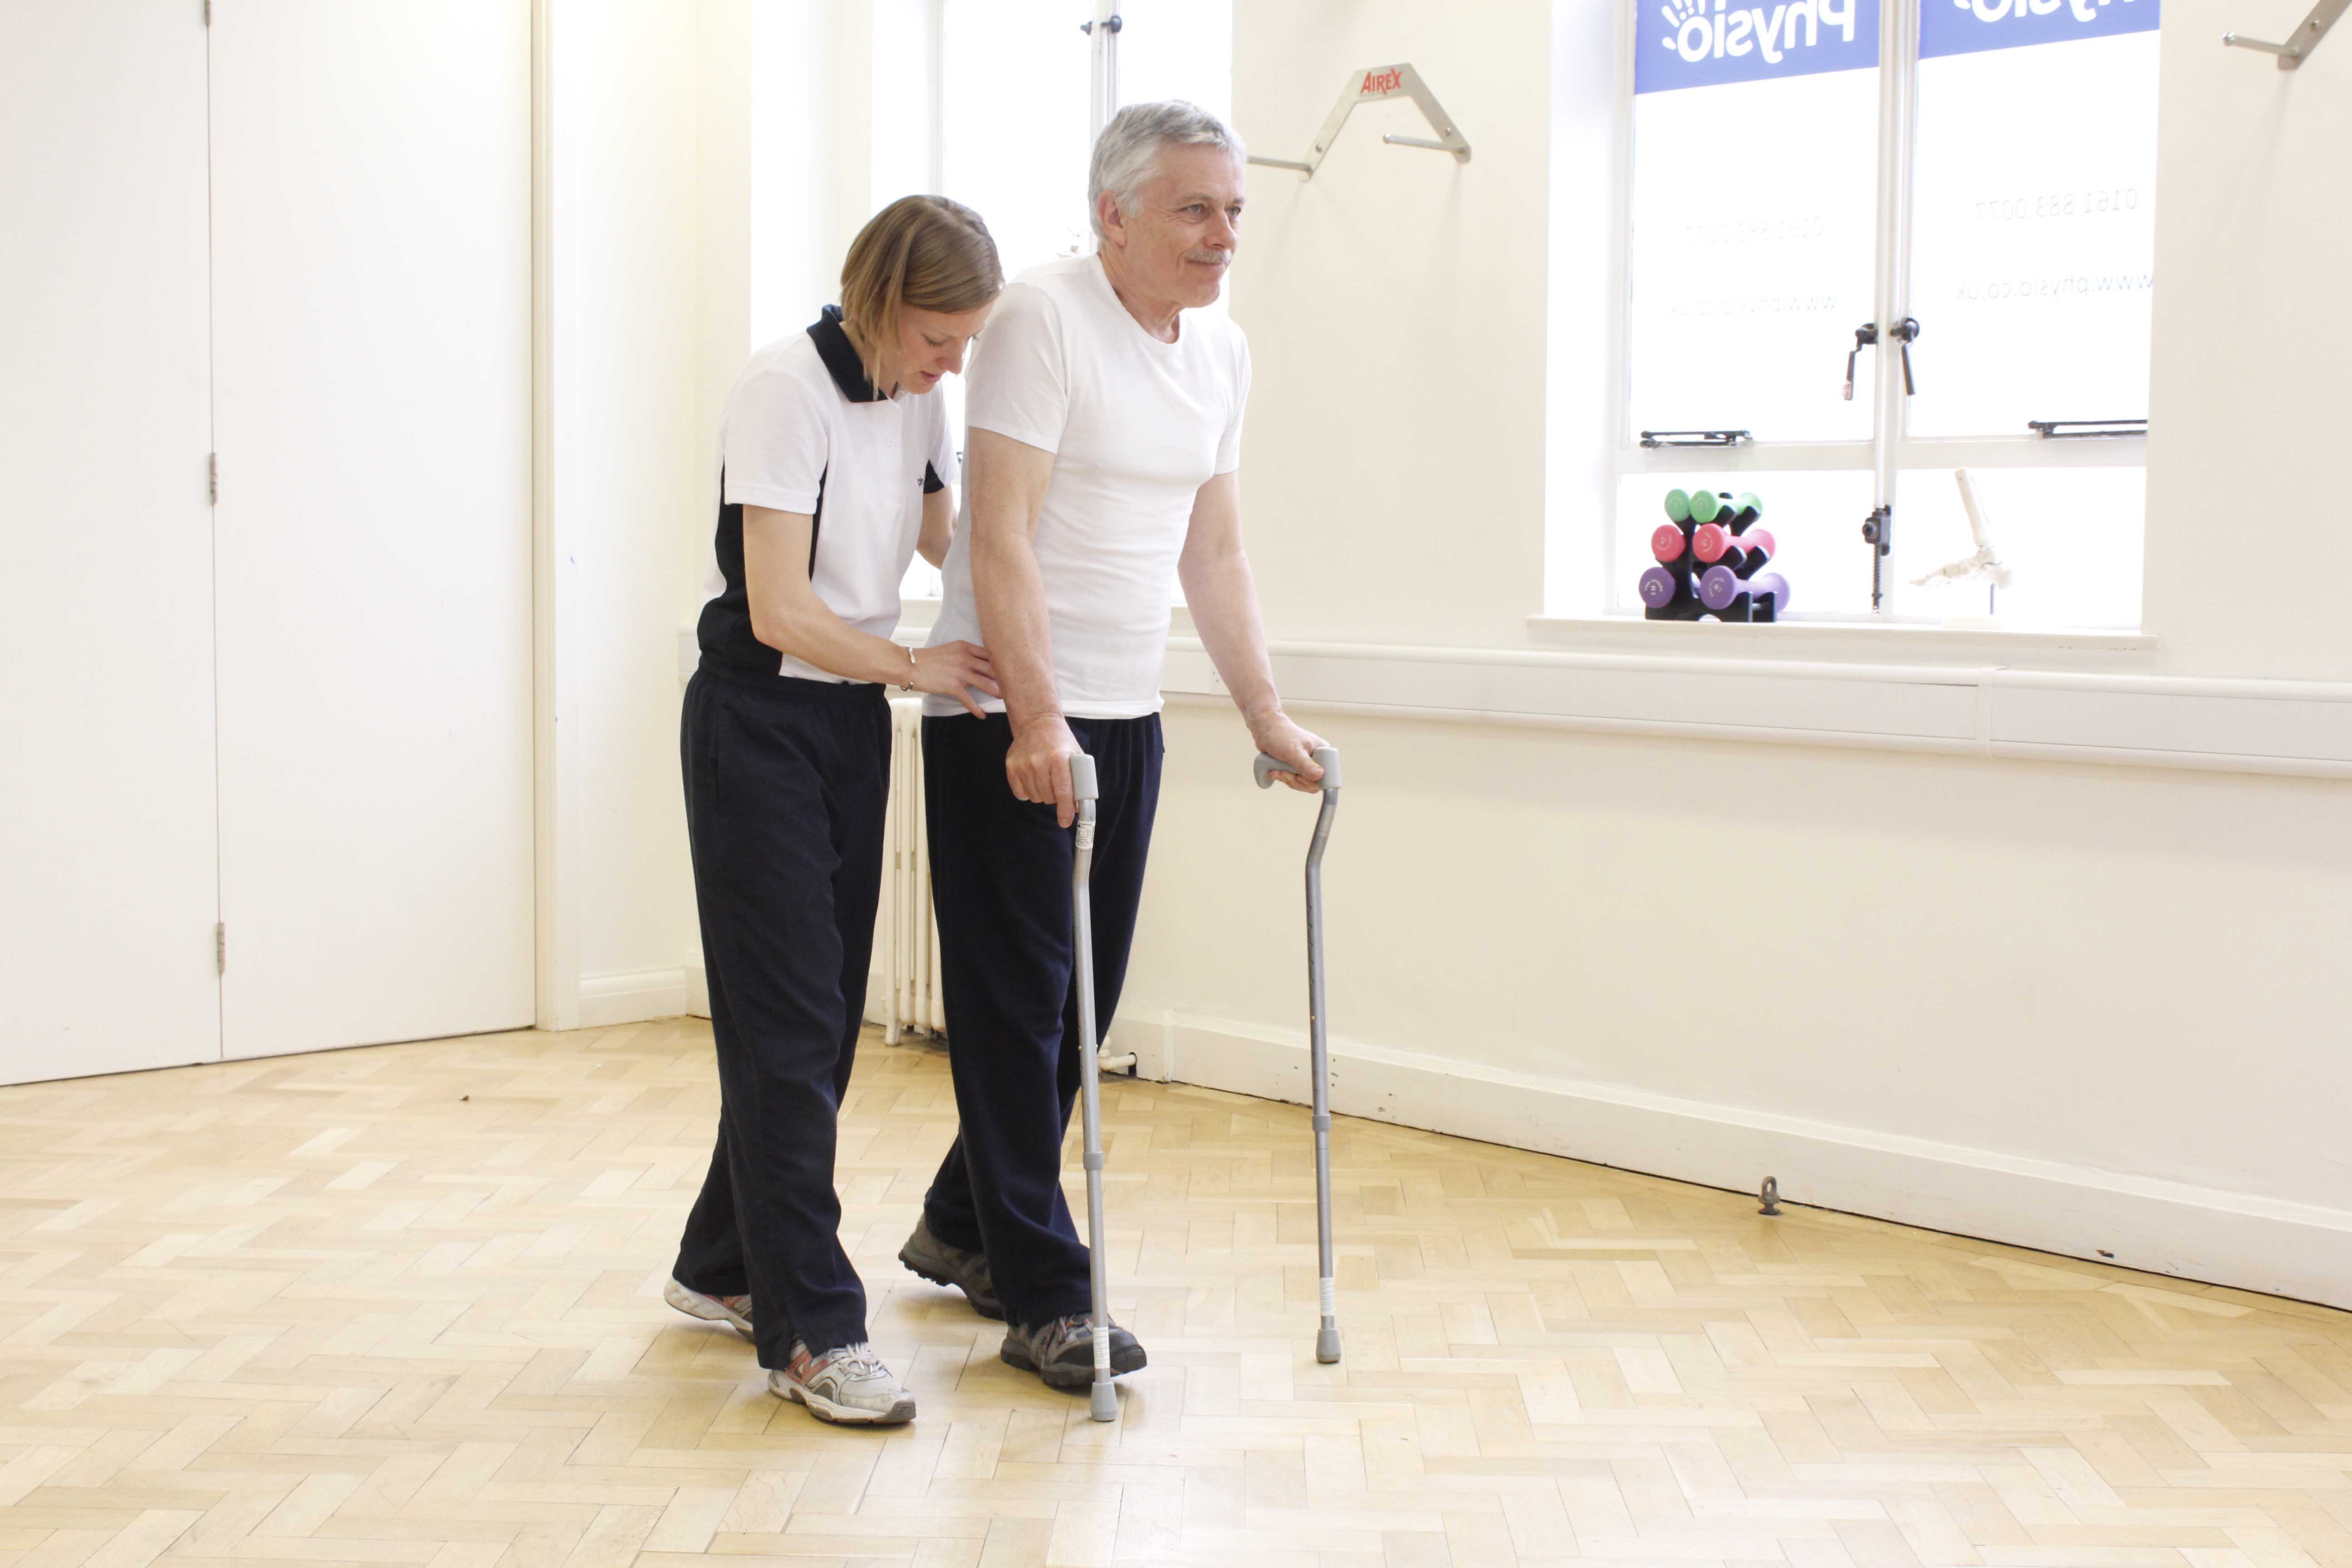 Mobility exercises using two walking sticks and close supervision of a physiotherapist